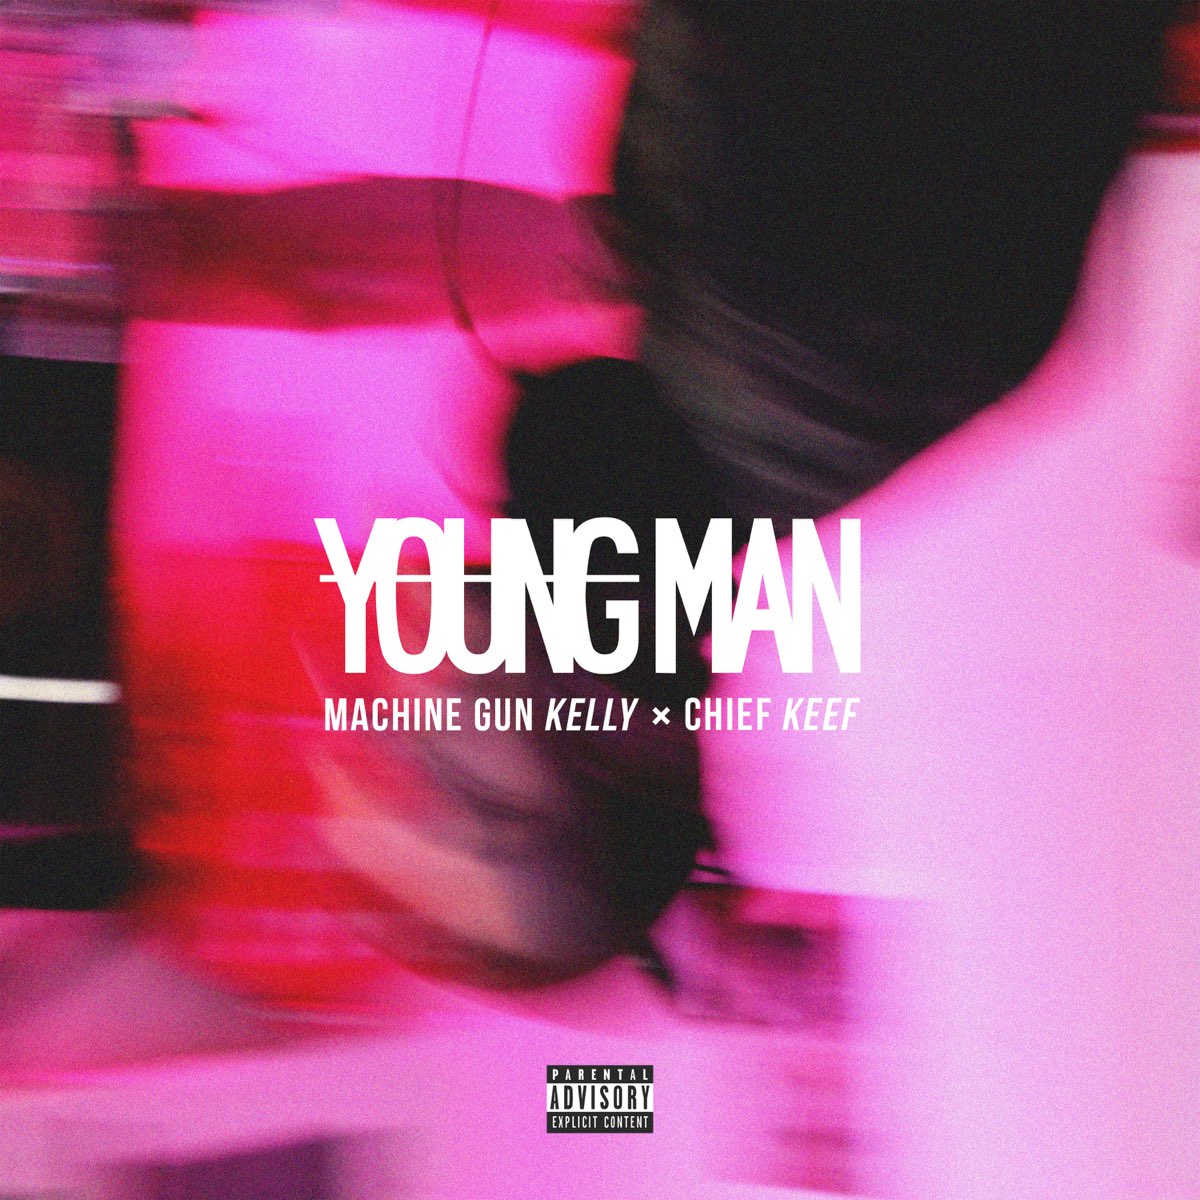 Machine Gun Kelly ft. Chief Keef - Young Man